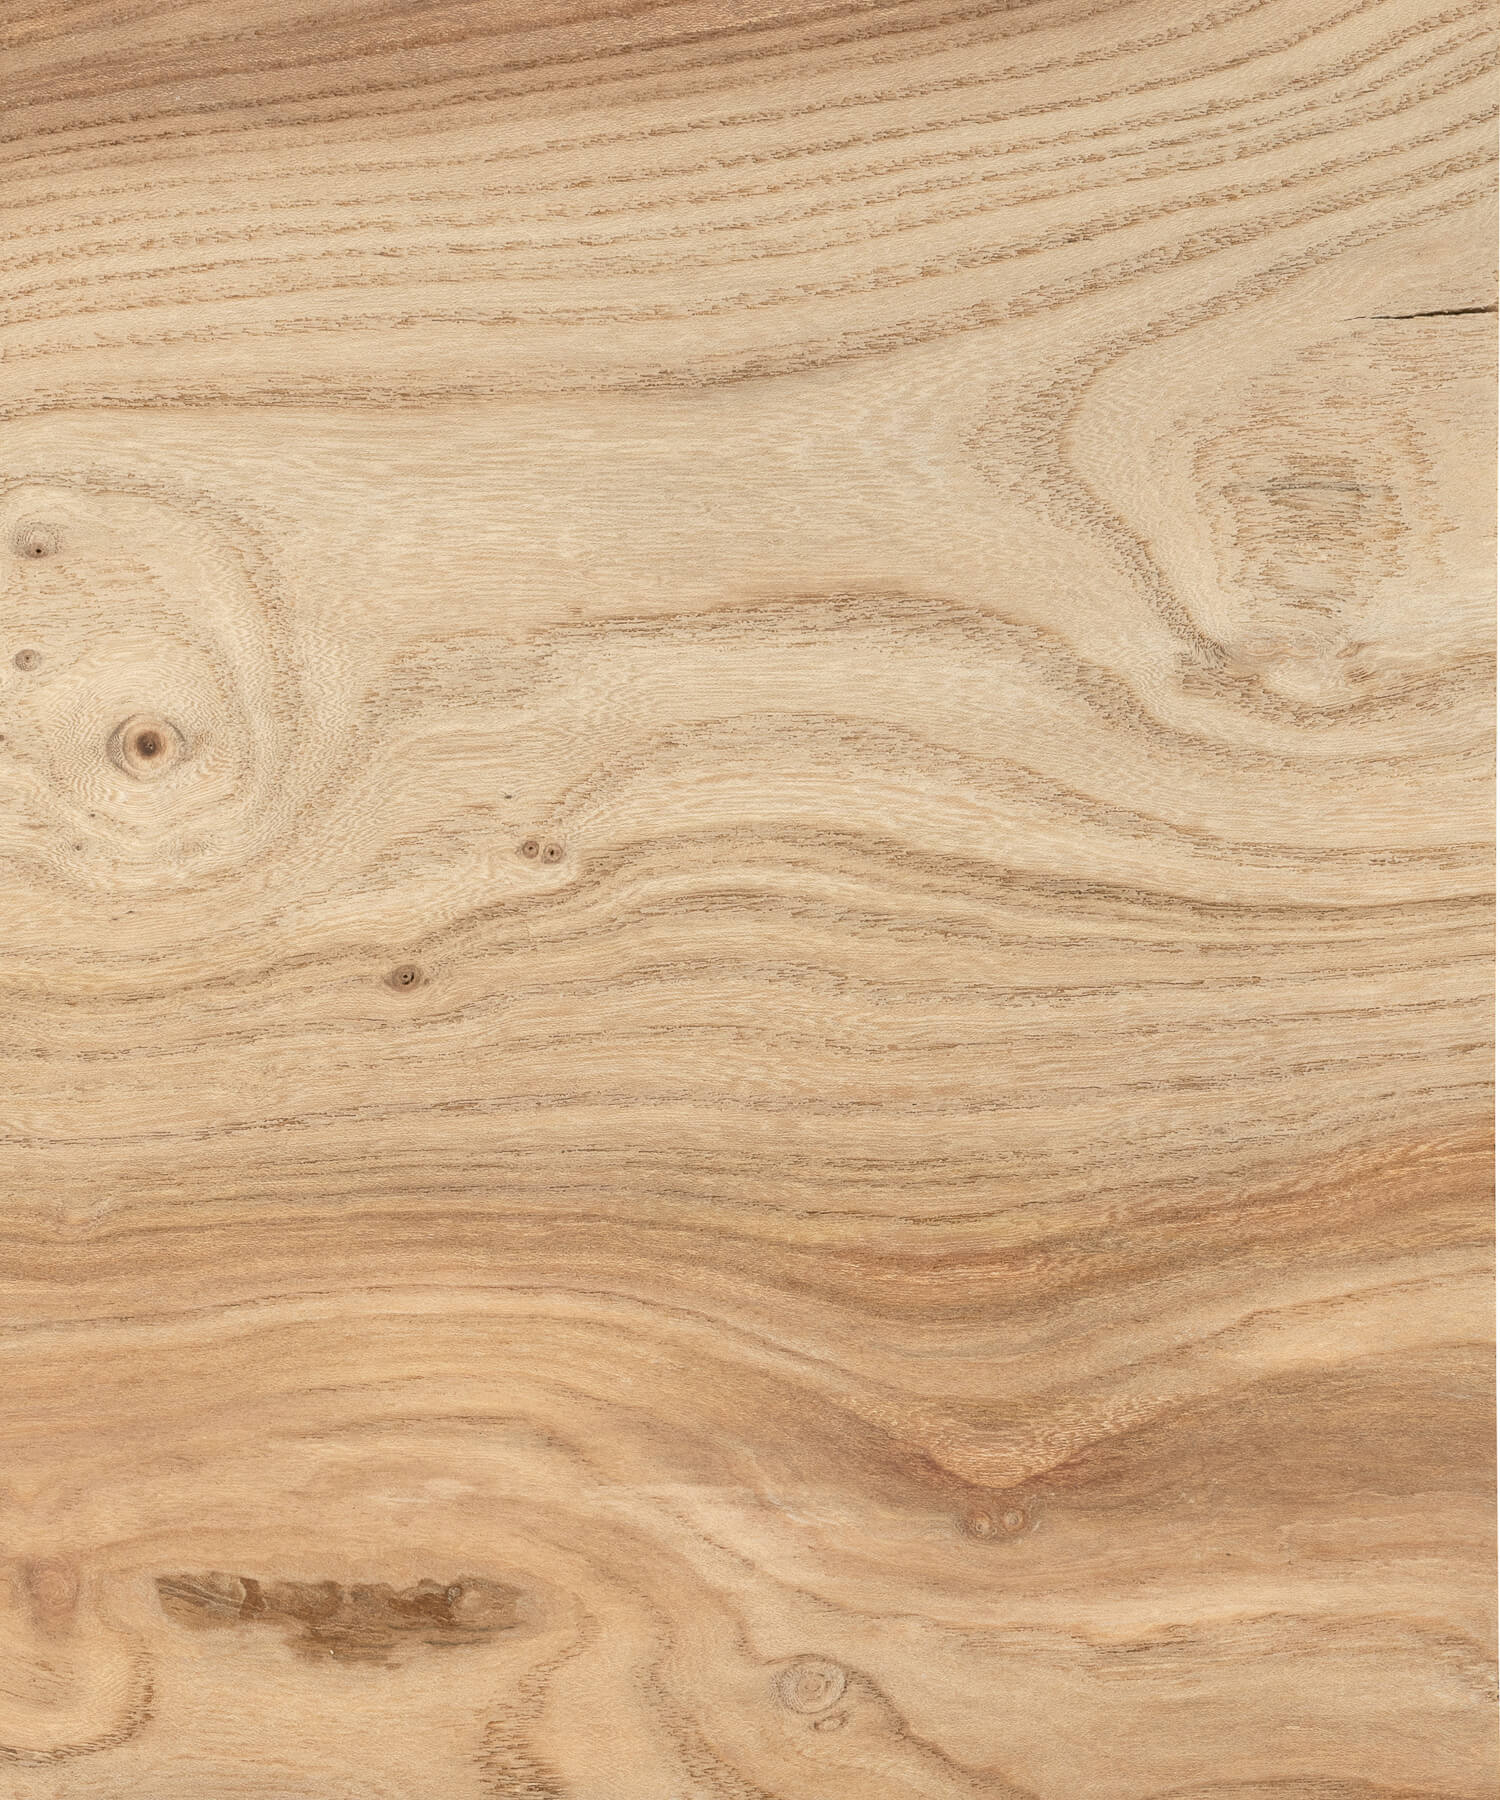 Unoiled elm timber close up